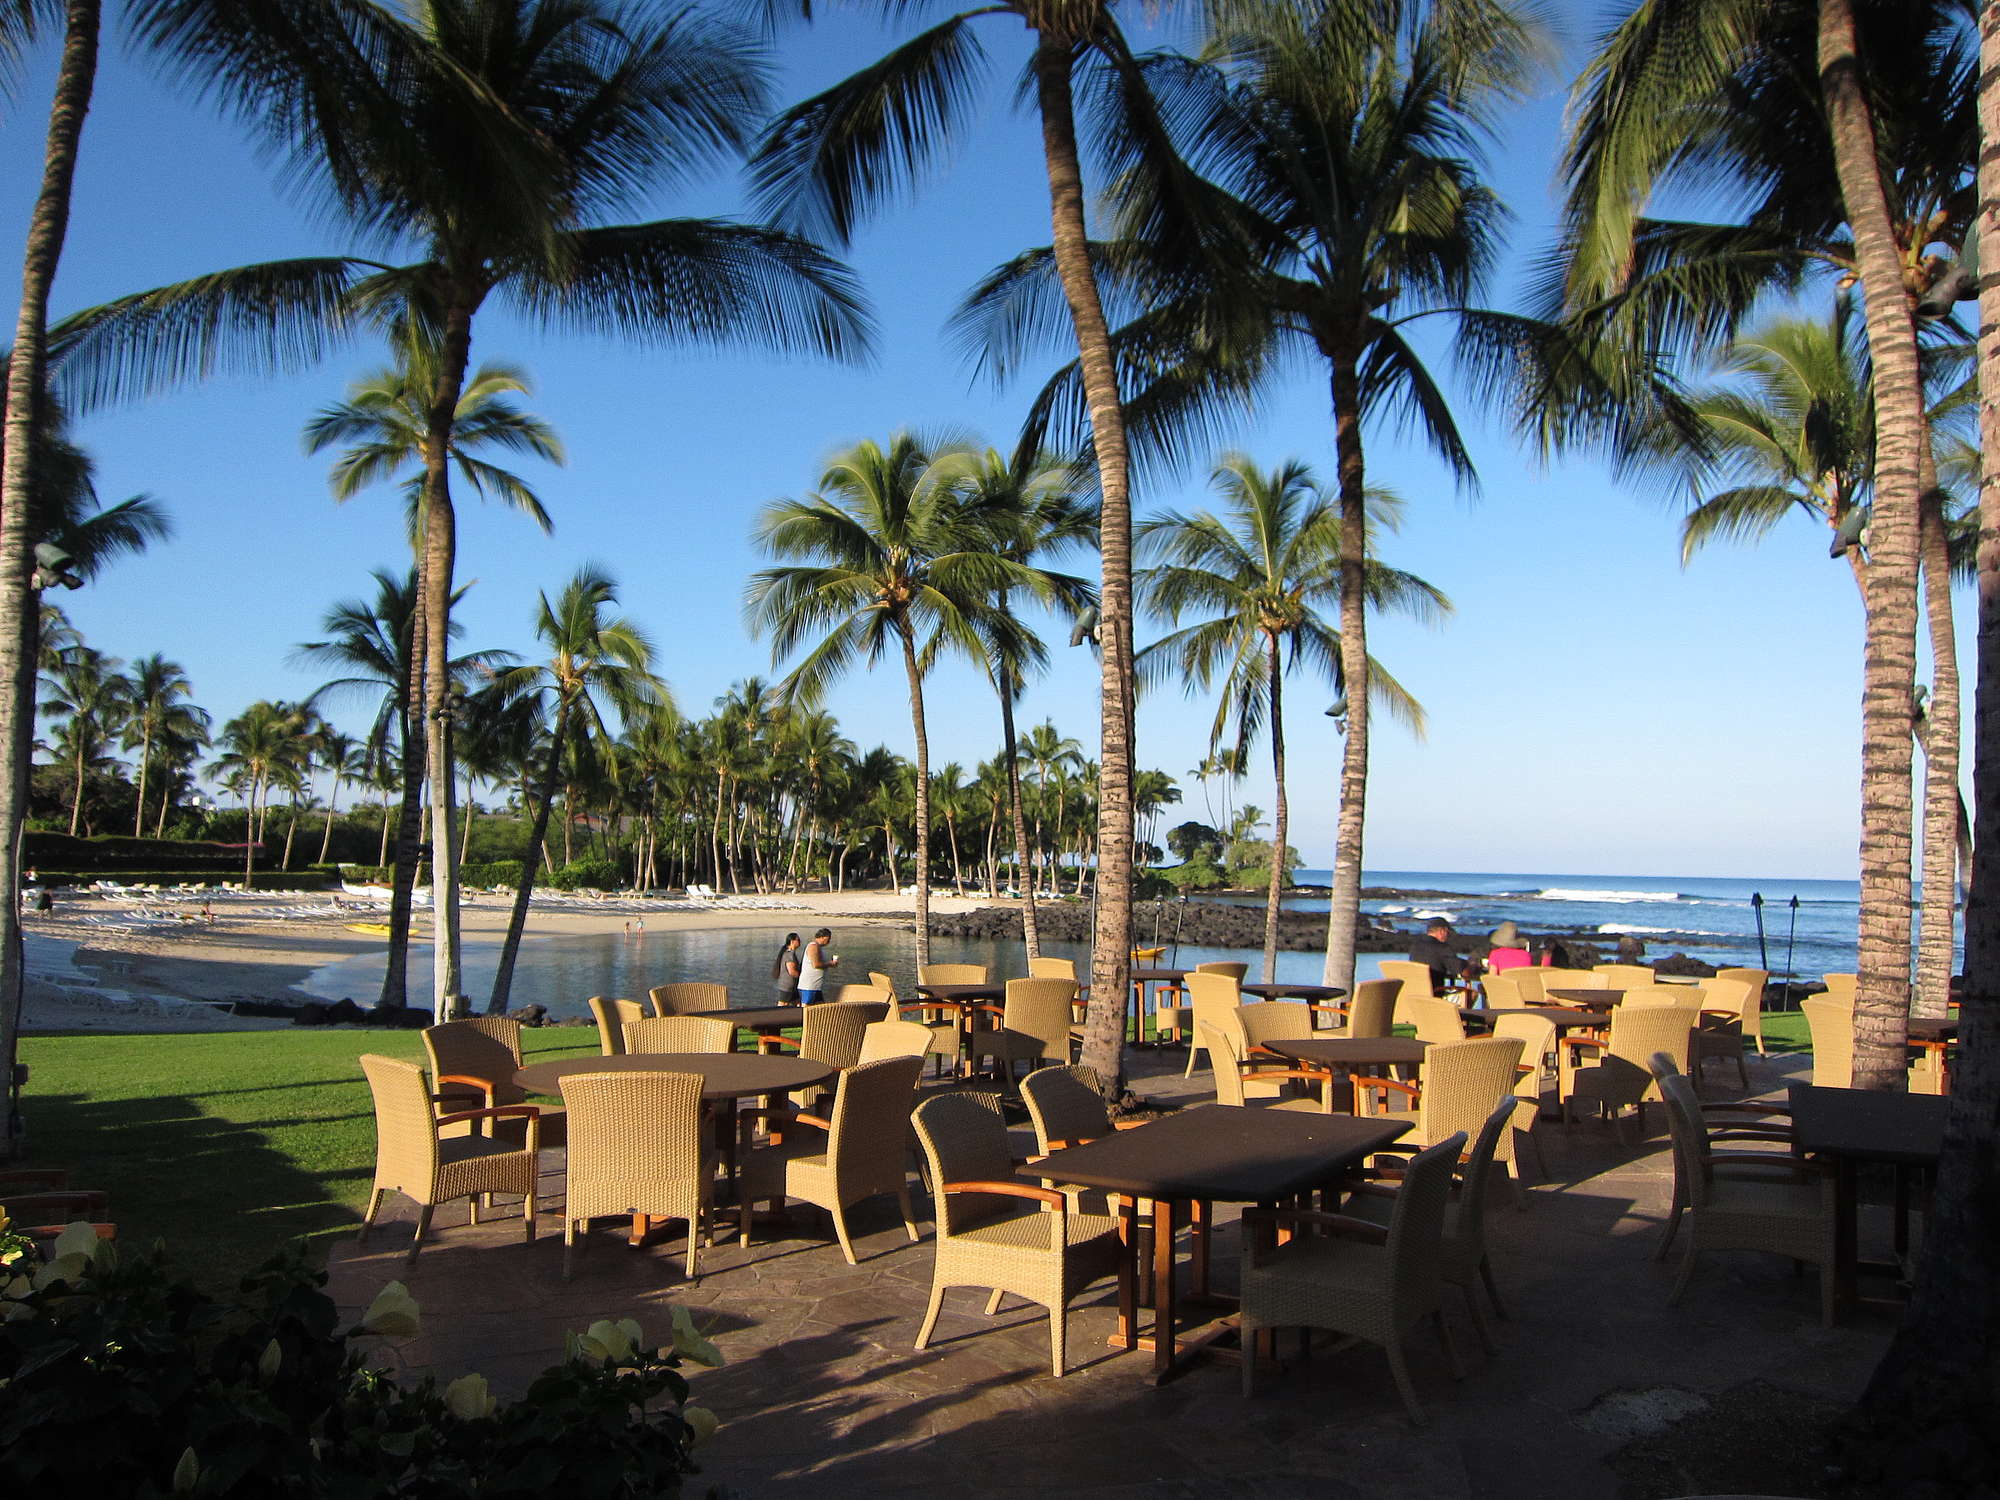 Fairmont Orchid Hawaii Expert Review | Fodor’s Travel